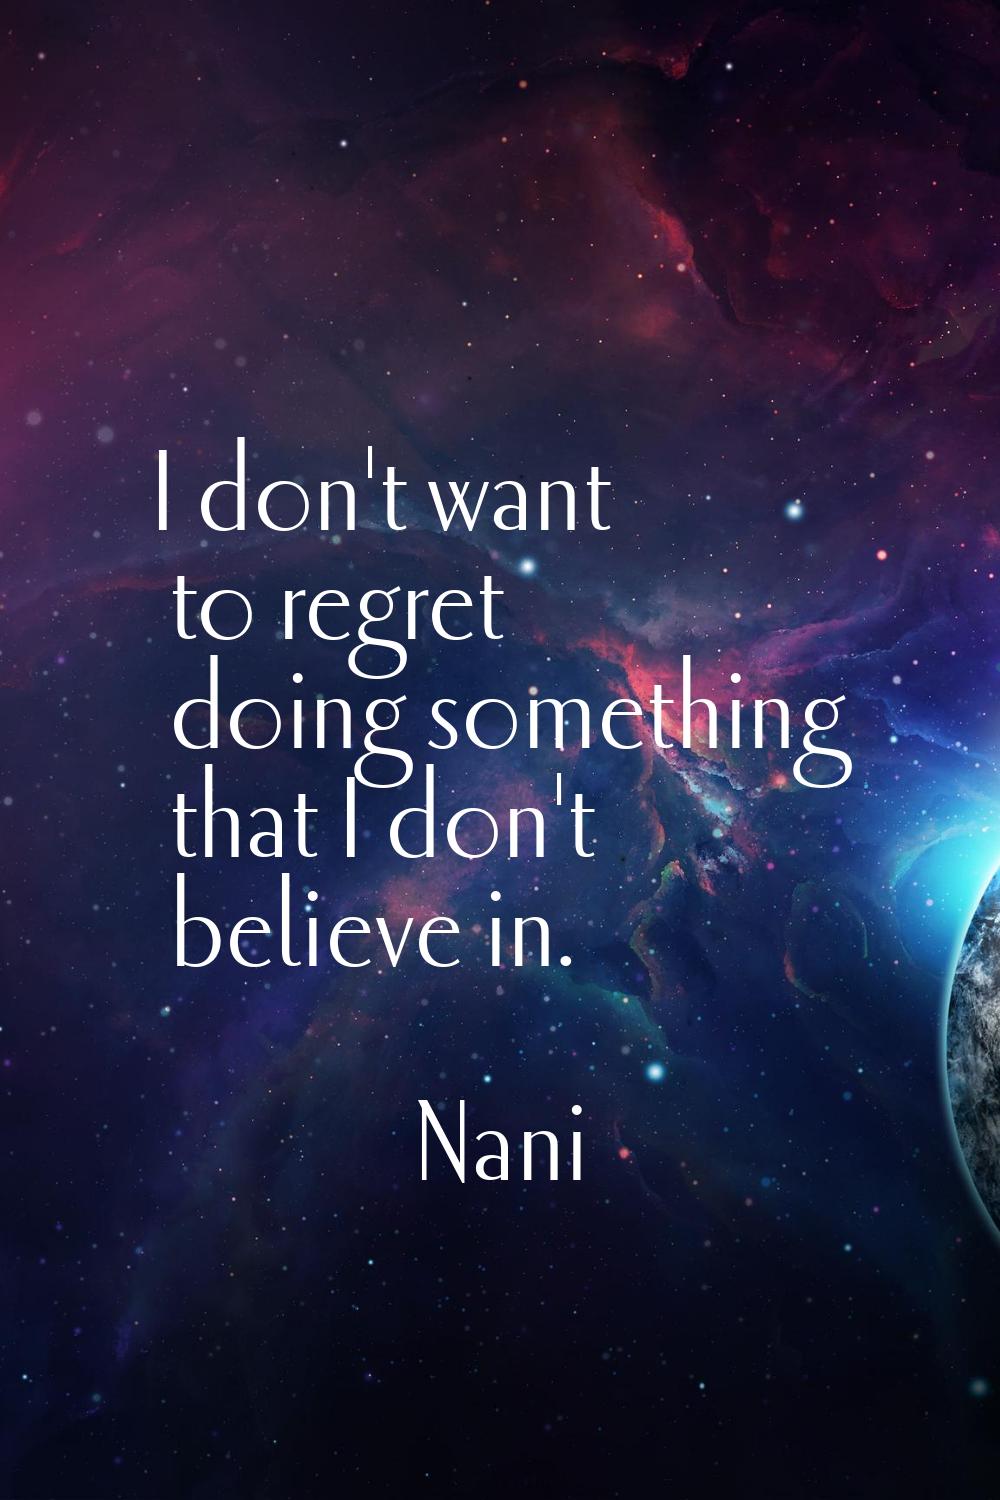 I don't want to regret doing something that I don't believe in.